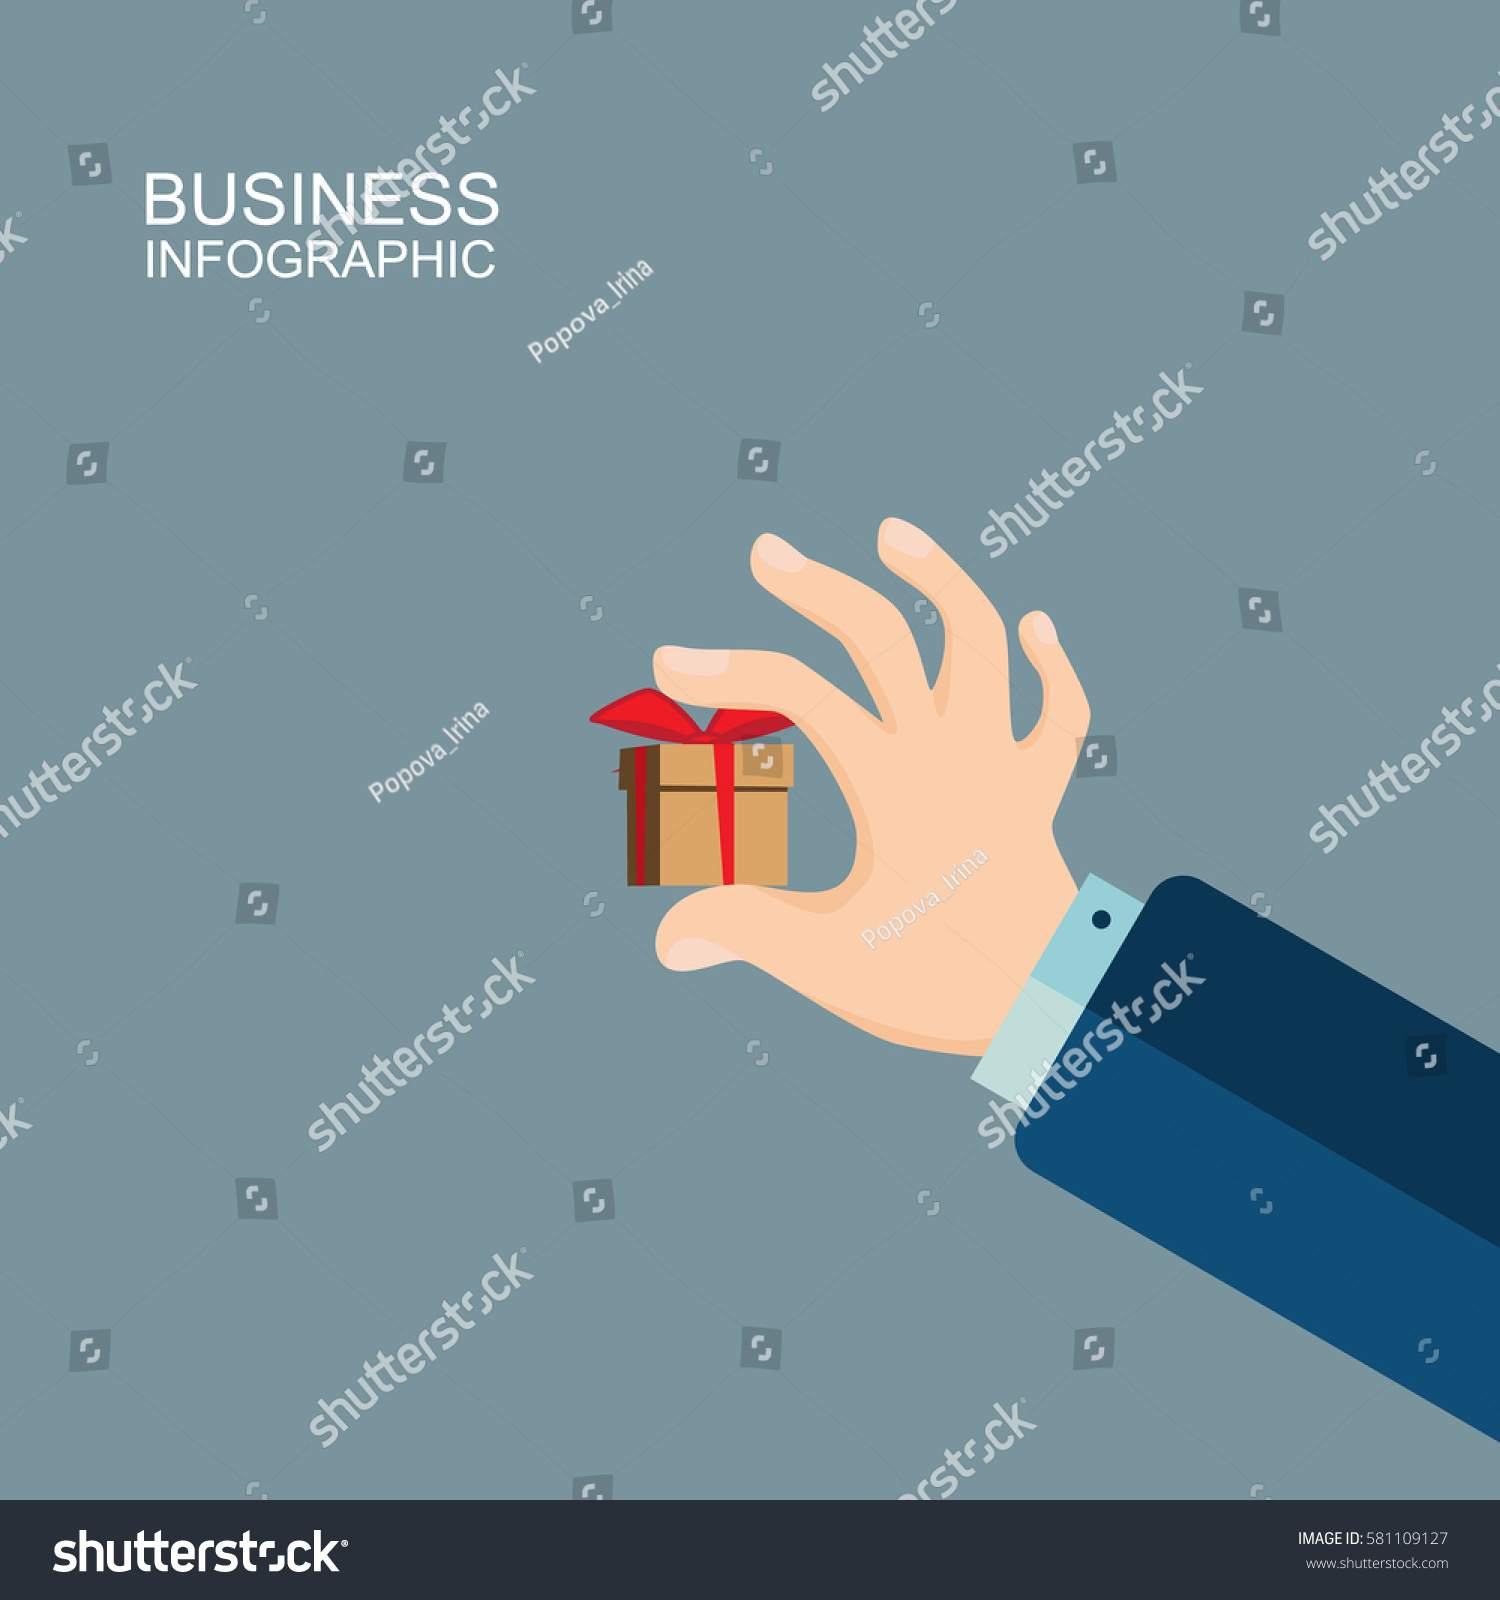 Human hand holding a small gift. Illustration in a flat design style. business finance concept for presentations, brochures, website, etc. #581109127